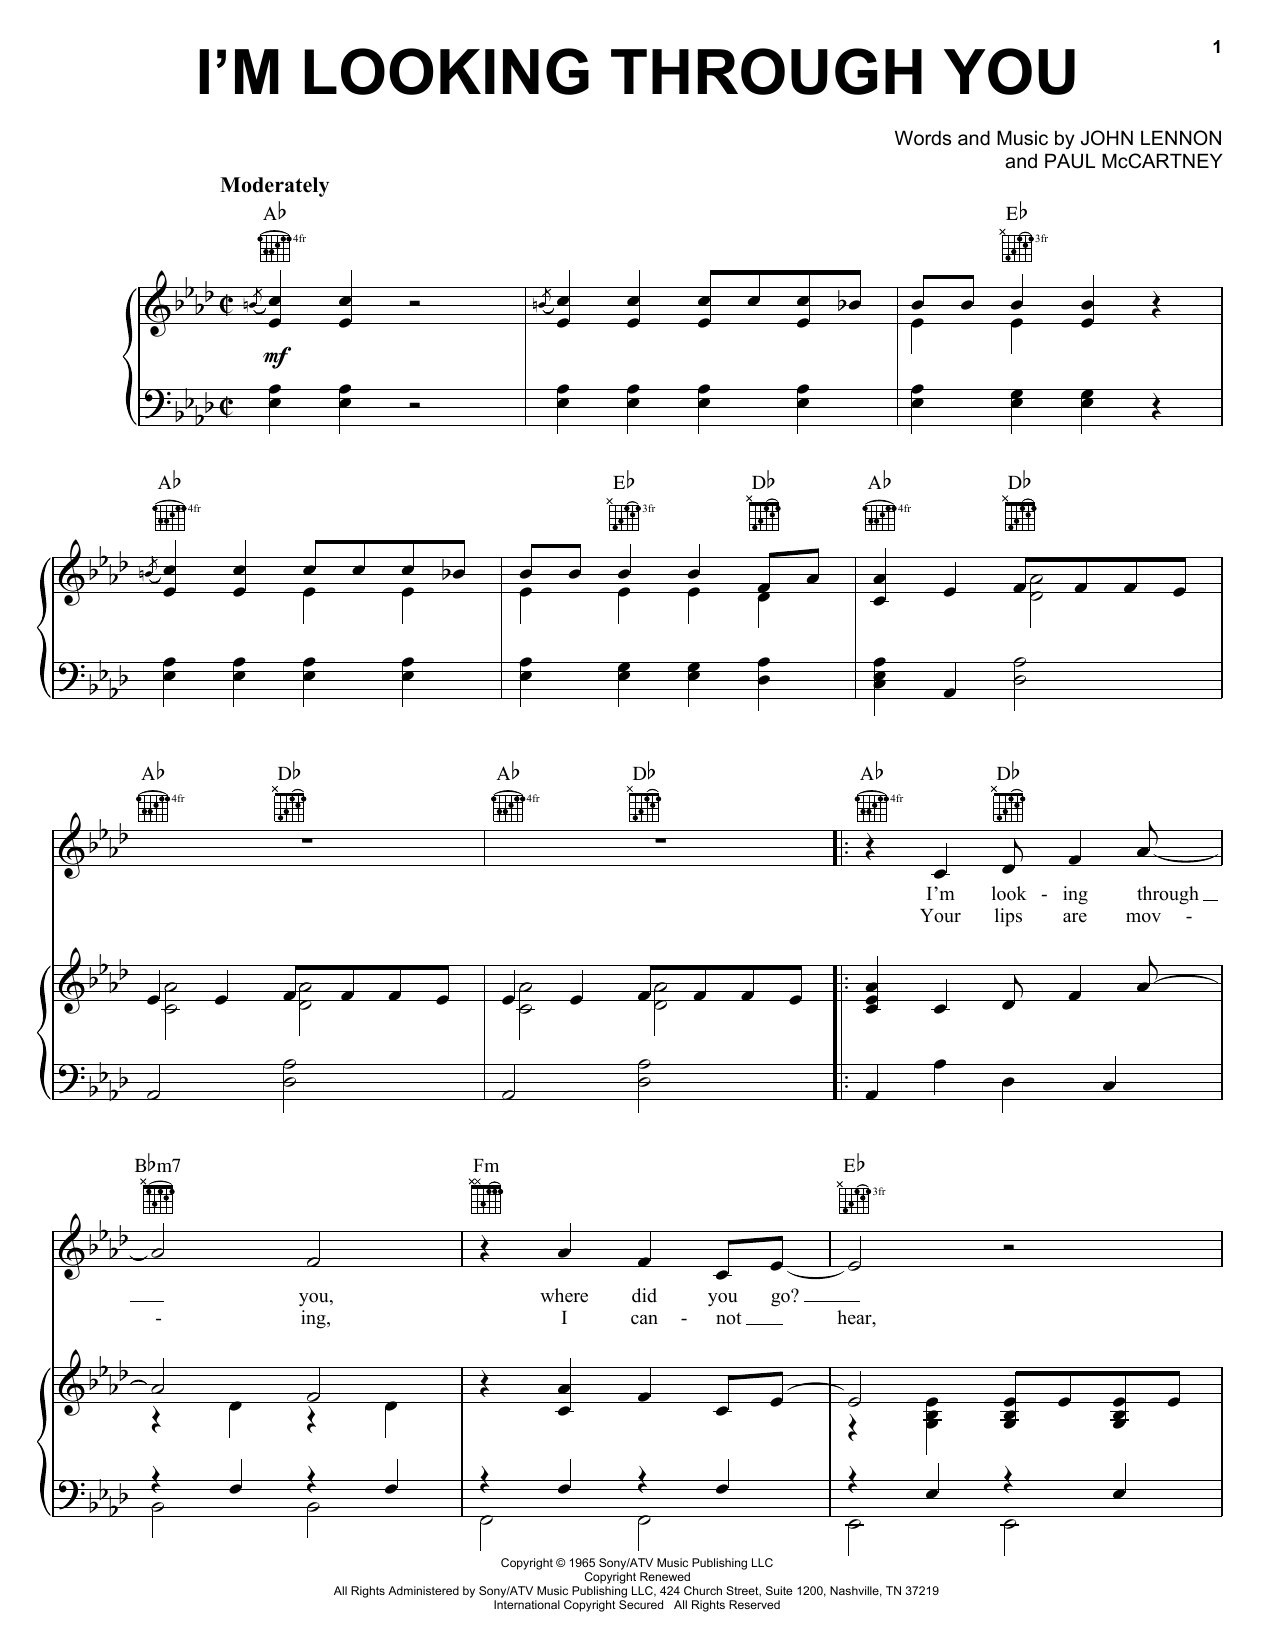 The Beatles I M Looking Through You Sheet Music Notes Chords Melody Line Lyrics Chords Download Pop Pdf